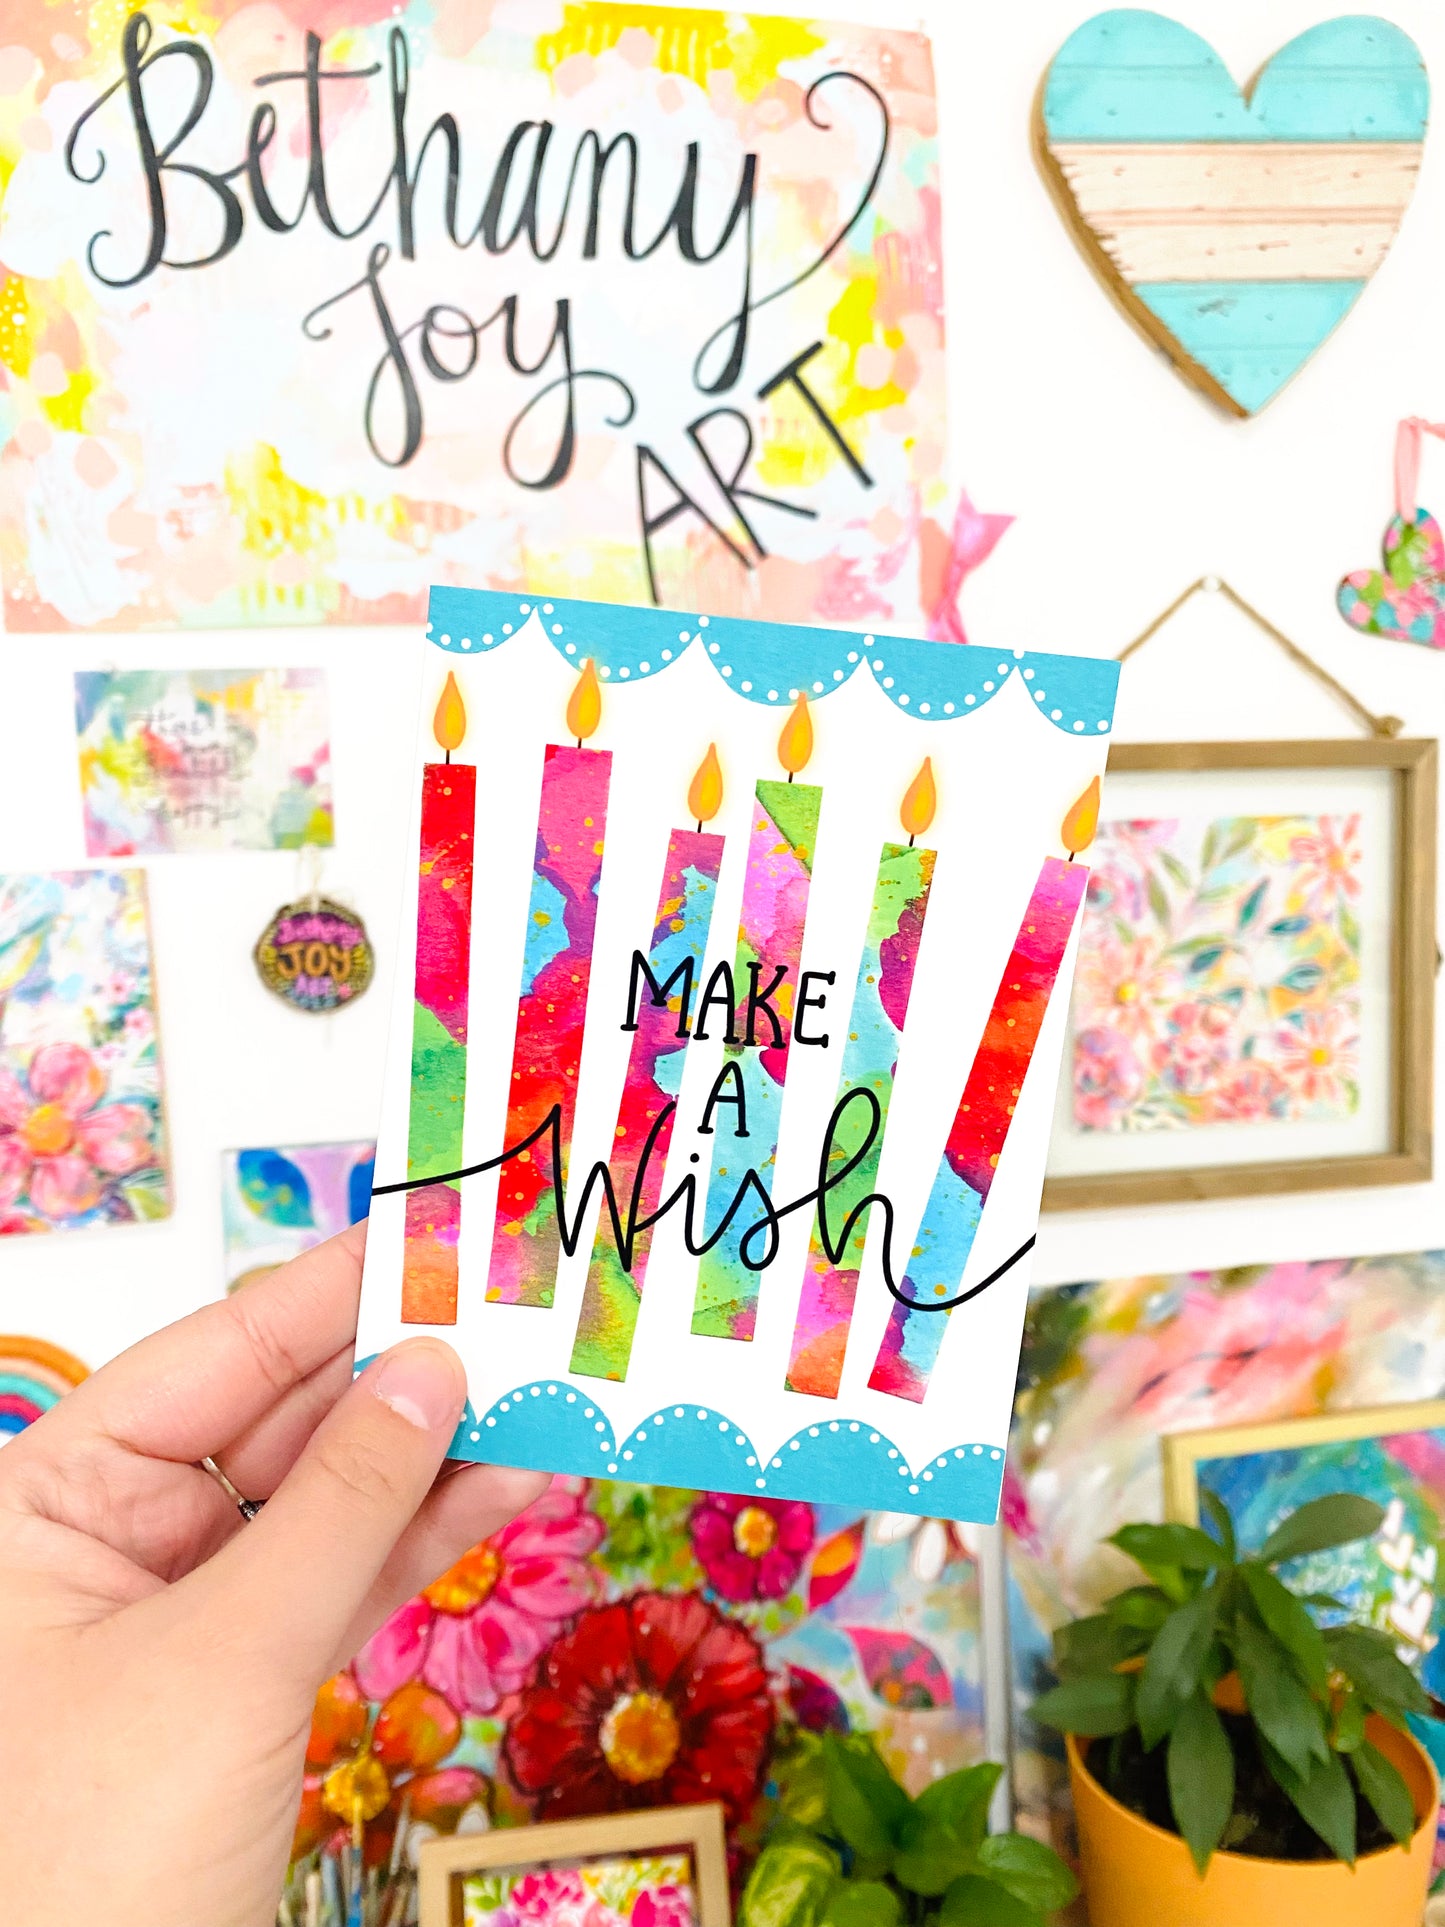 "Make a Wish" Card with Envelope